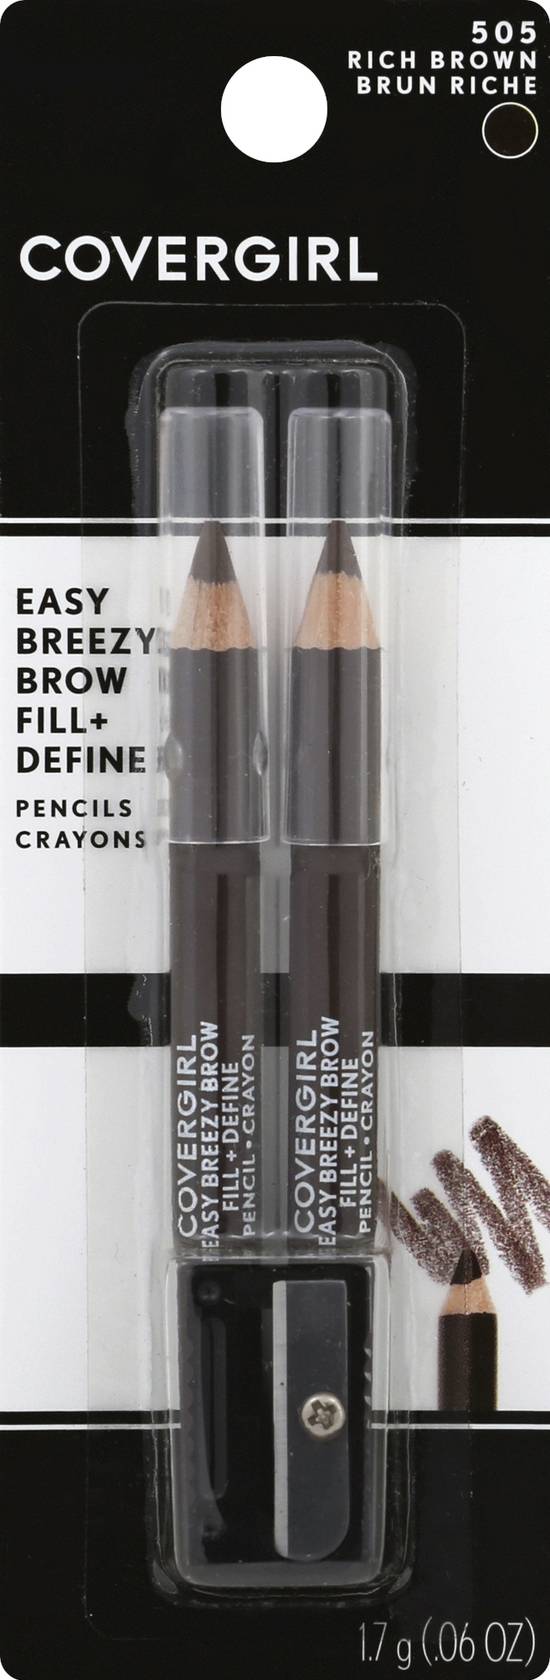 Covergirl 505 Rich Brown Pencils Crayons (2 ct)